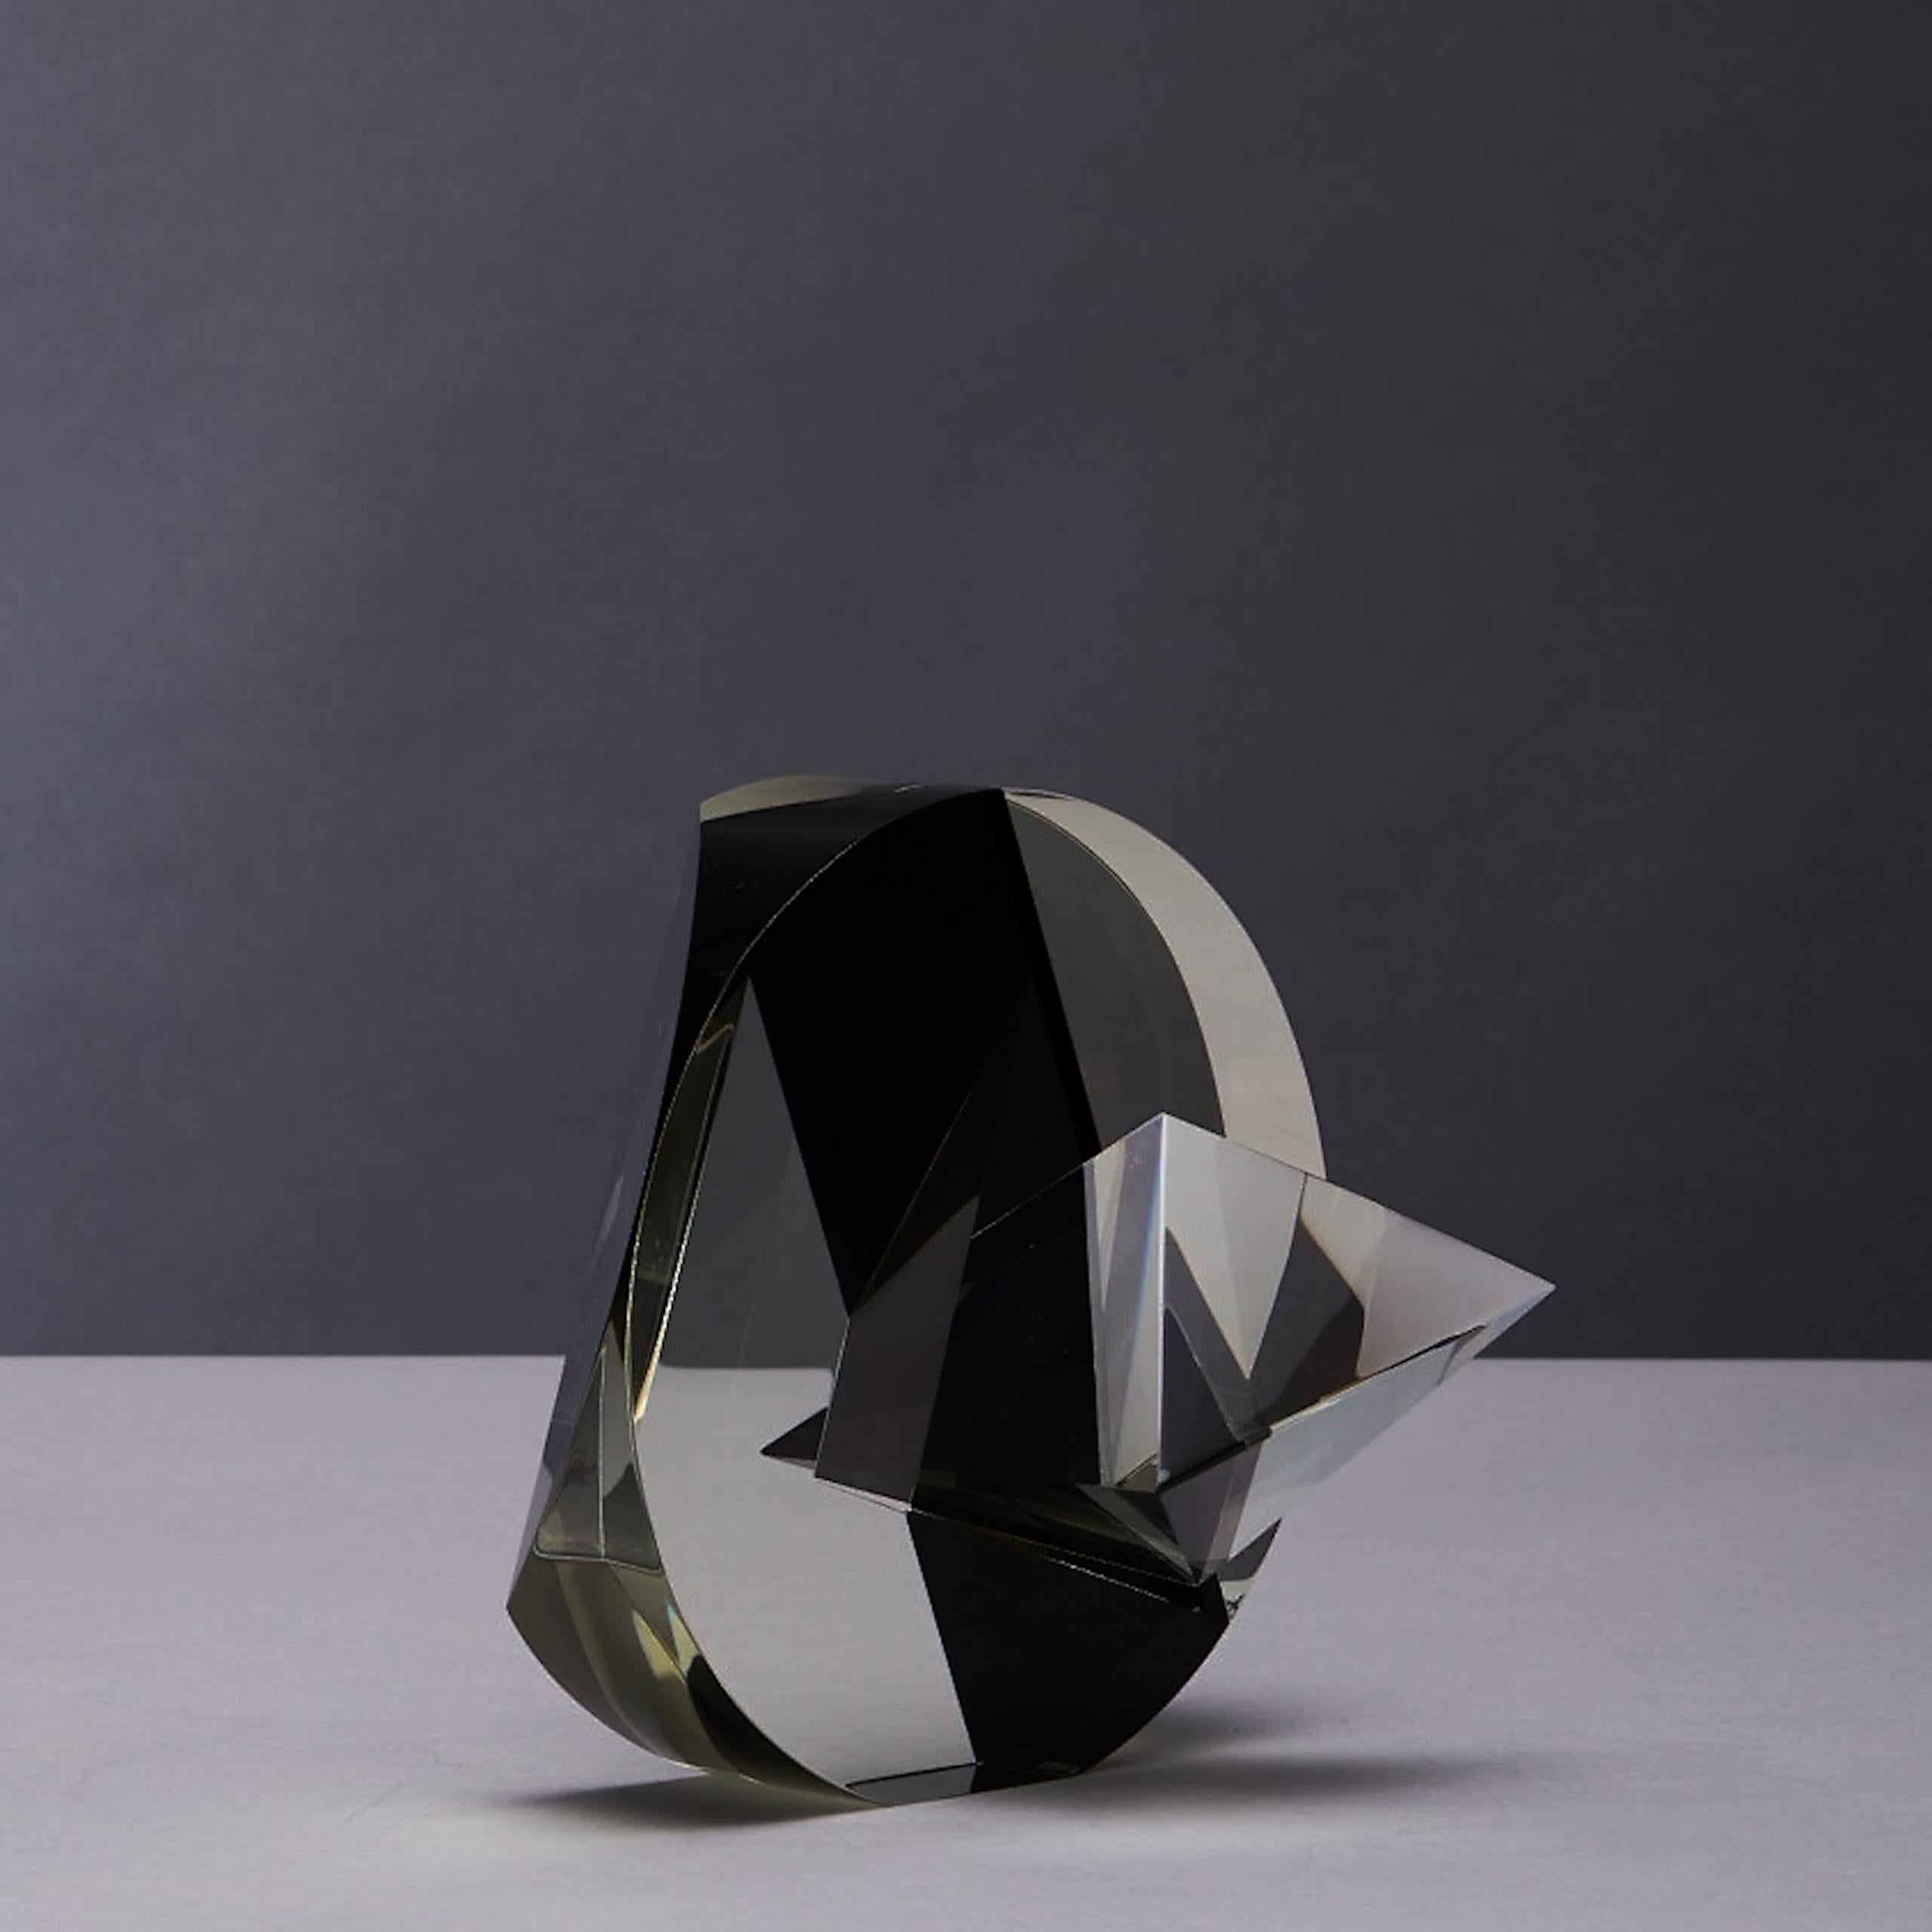 The sculpture is hand cut in circles and triangles, piercing the circular shape of clear and black optical glass, by Vlastislav Janacek is Czeck (signed). 
After graduating with a glass cutter he was successfully graduated from the School of Applied